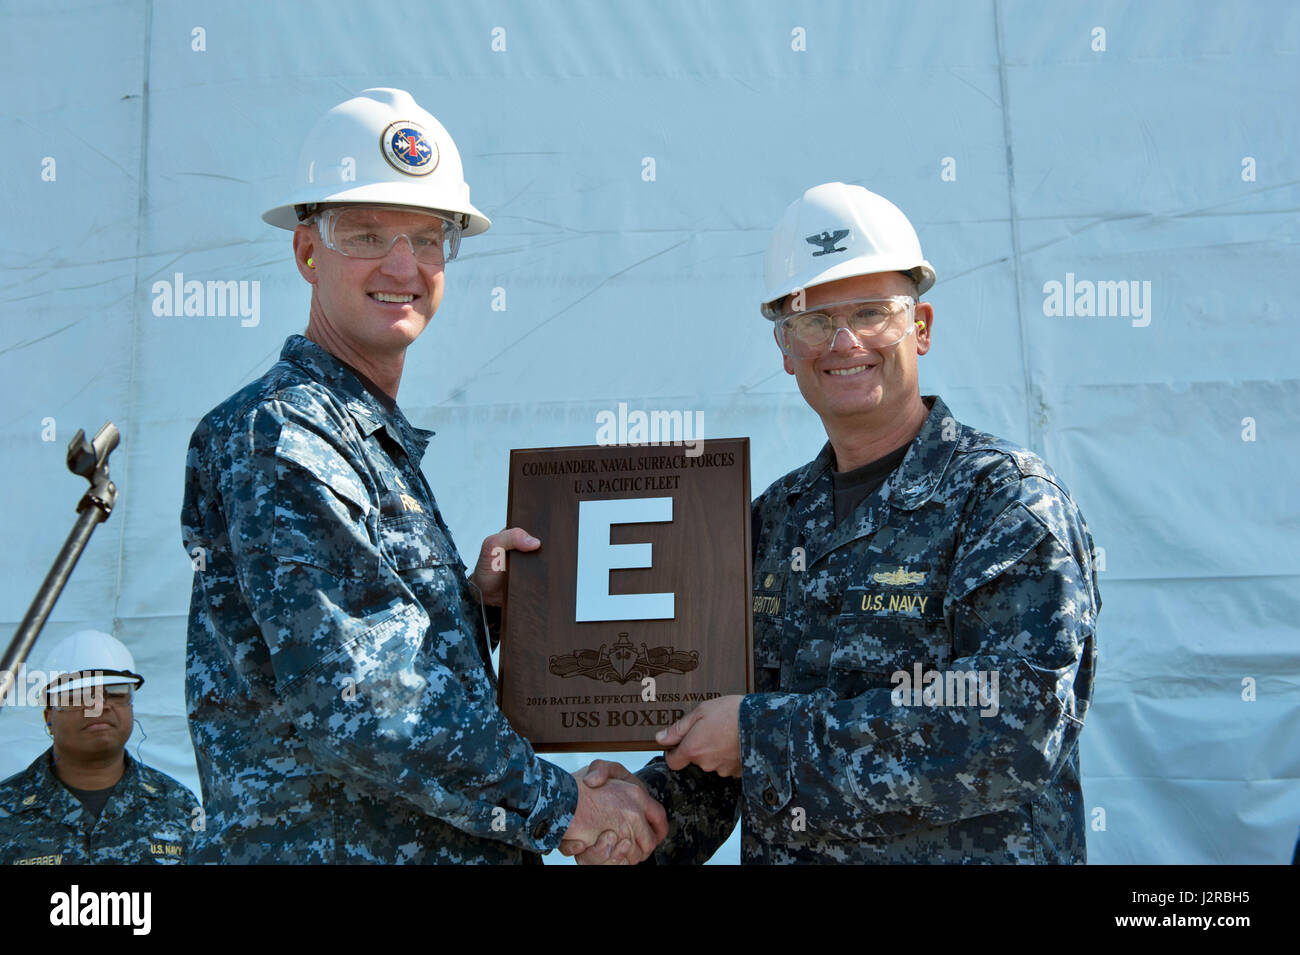 170421-N-UB927-027 SAN DIEGO (April 21, 2017) Capt. Patrick Foege, commander, Amphibious Squadron 1, presents Capt. Benjamin Albritton, commanding officer of amphibious assault ship USS Boxer (LHD 4) with the 6th consecutive Battle Effectiveness, or ‘Battle E,’ award during an all-hands call. Boxer is at it's homeport undergoing a phased maintenance availability. (U.S. Navy photo by Mass Communication Specialist 3rd Class Brett A. Anderson/Released) Stock Photo